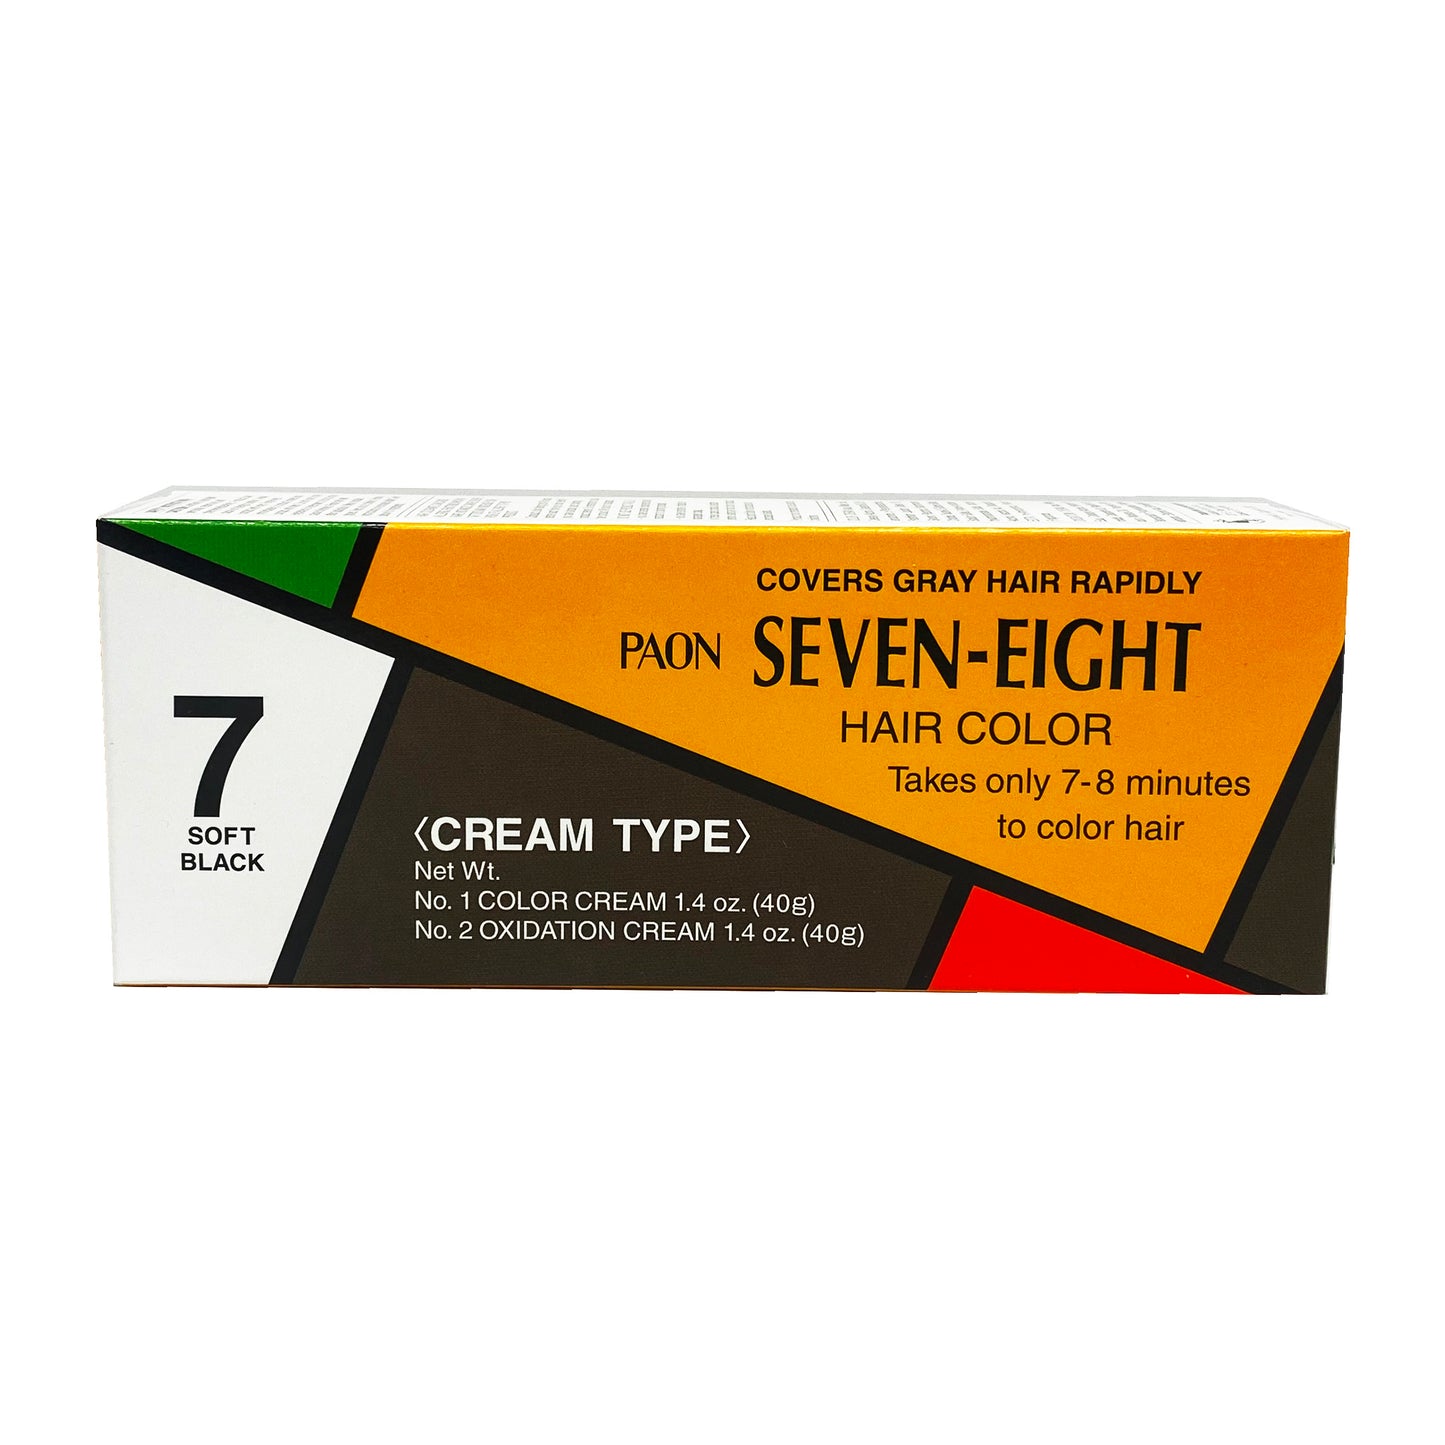 Front graphic view of Paon Seven-Eight Hair Color Cream Type Refill - 7 Soft Black 2.8oz (80g)